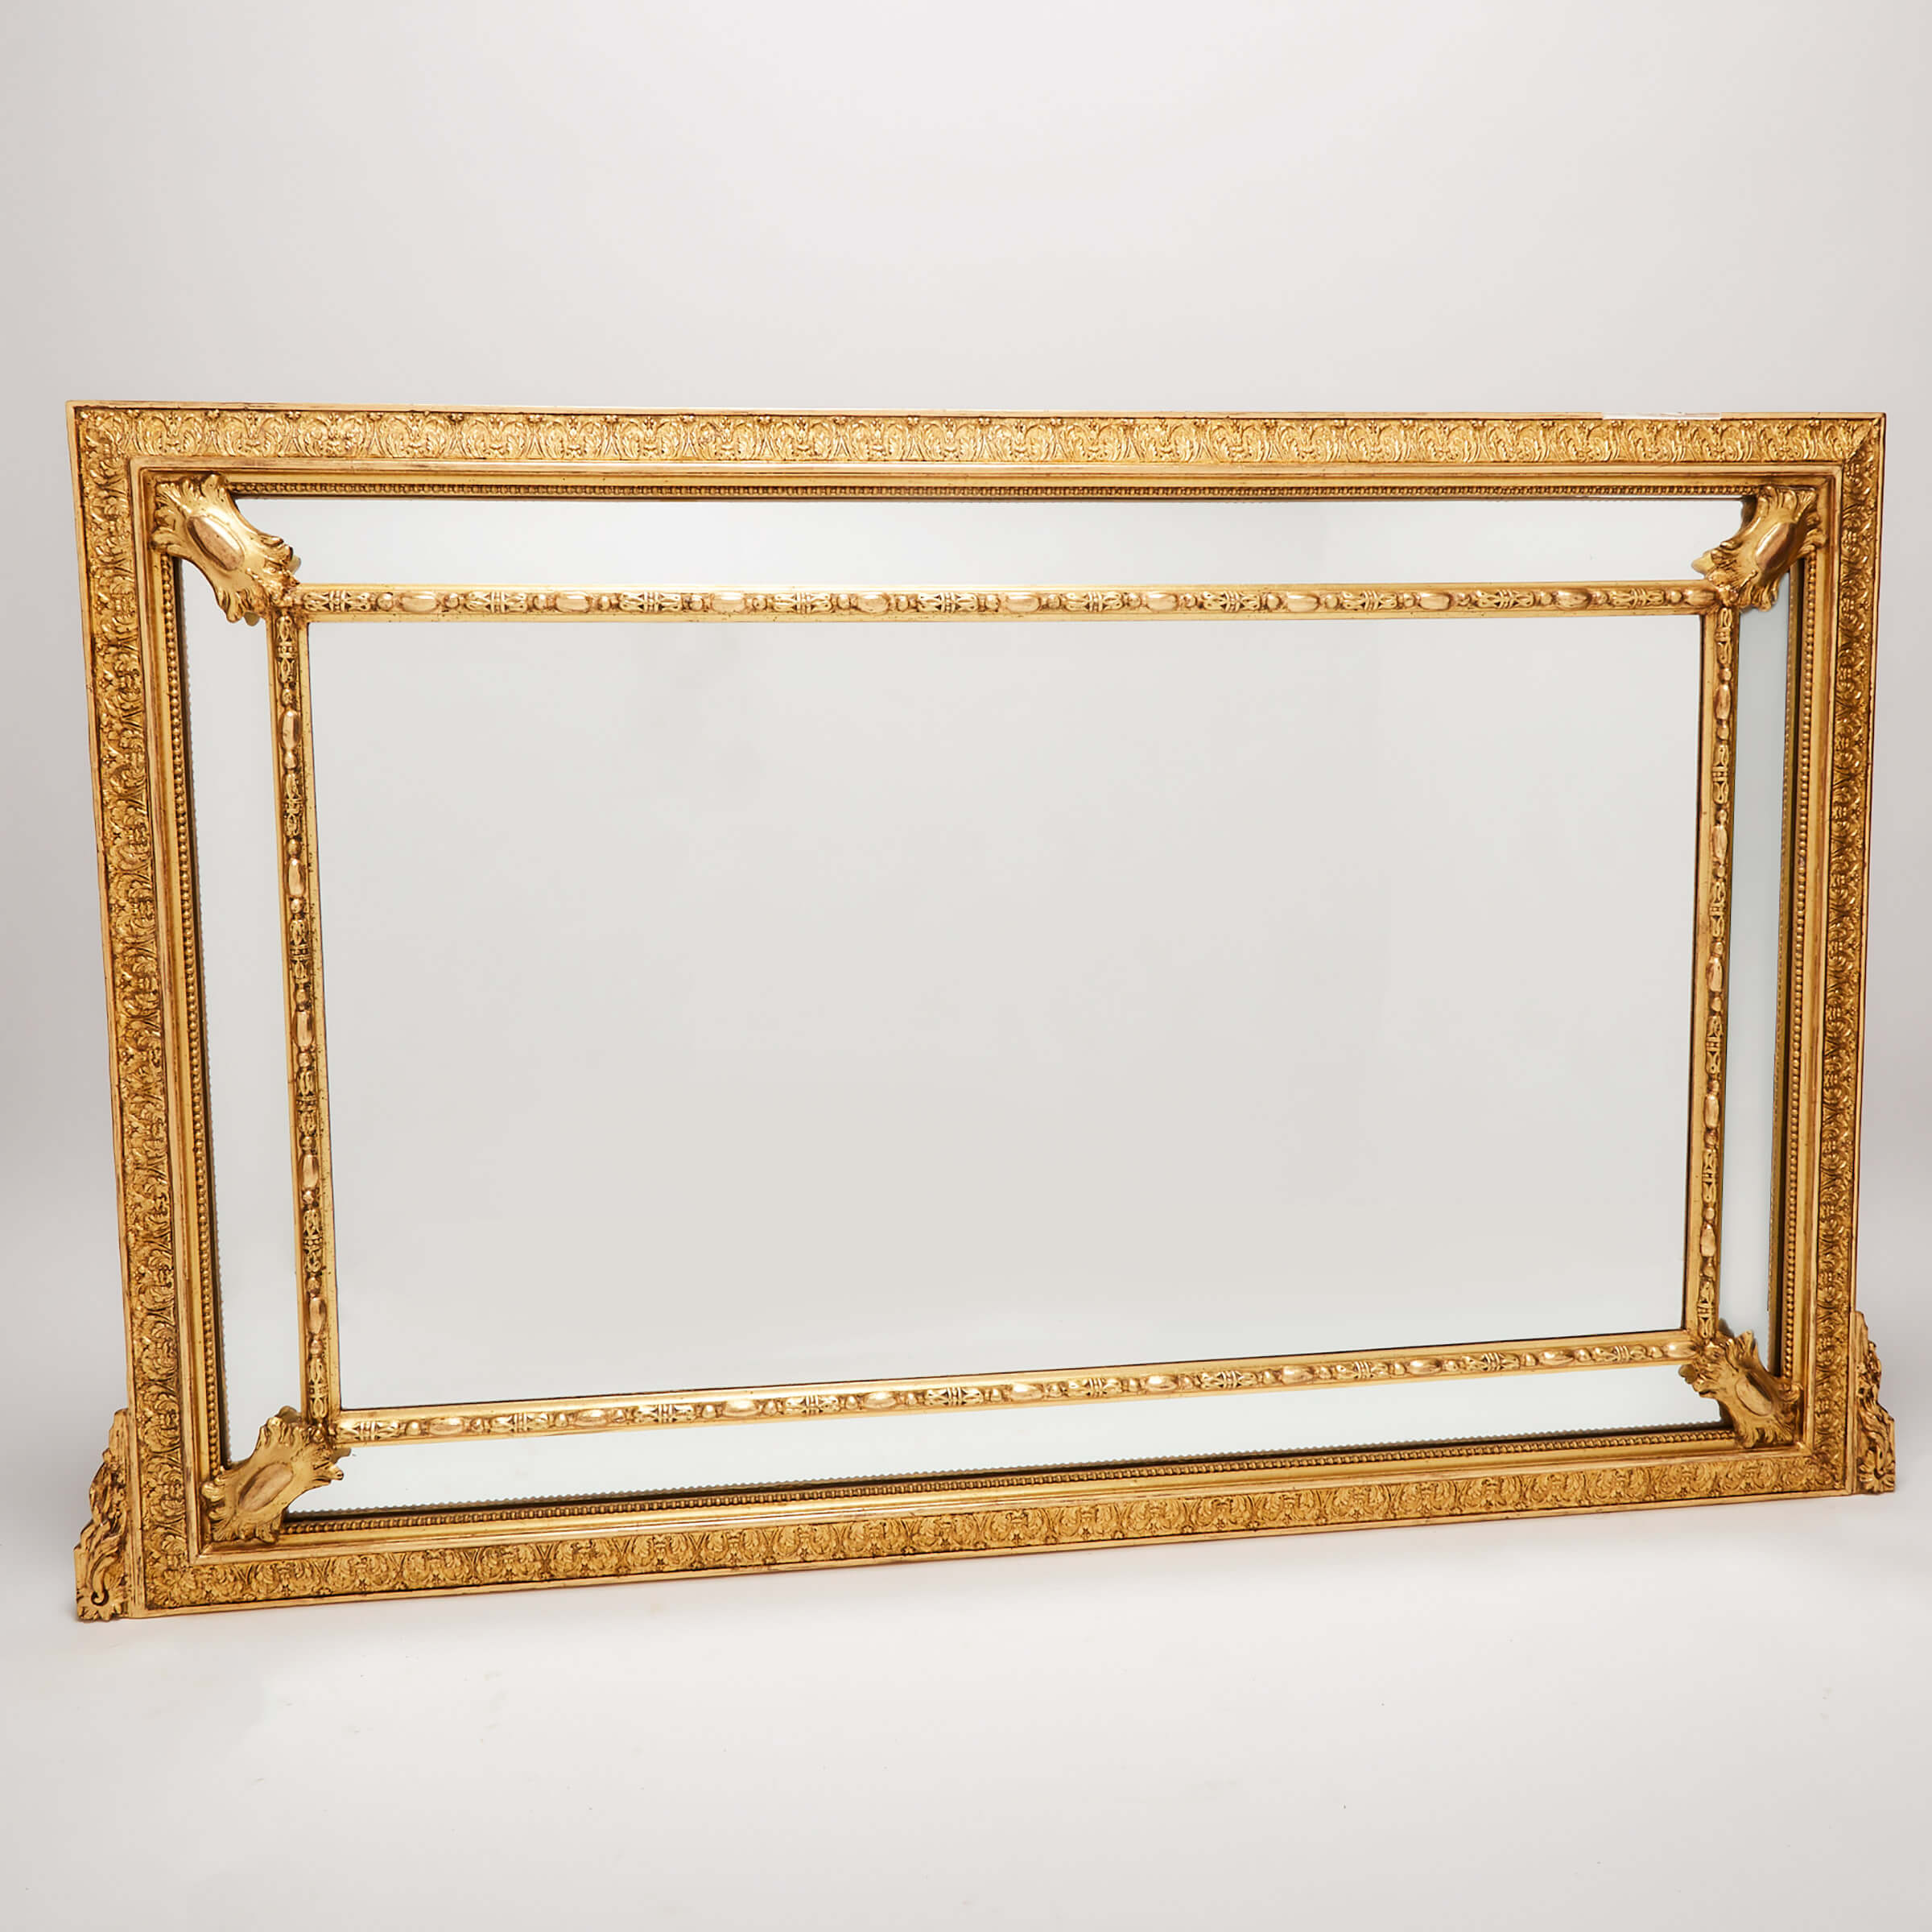 Giltwood Mirror Framed Overmantle Mirror, early 20th century